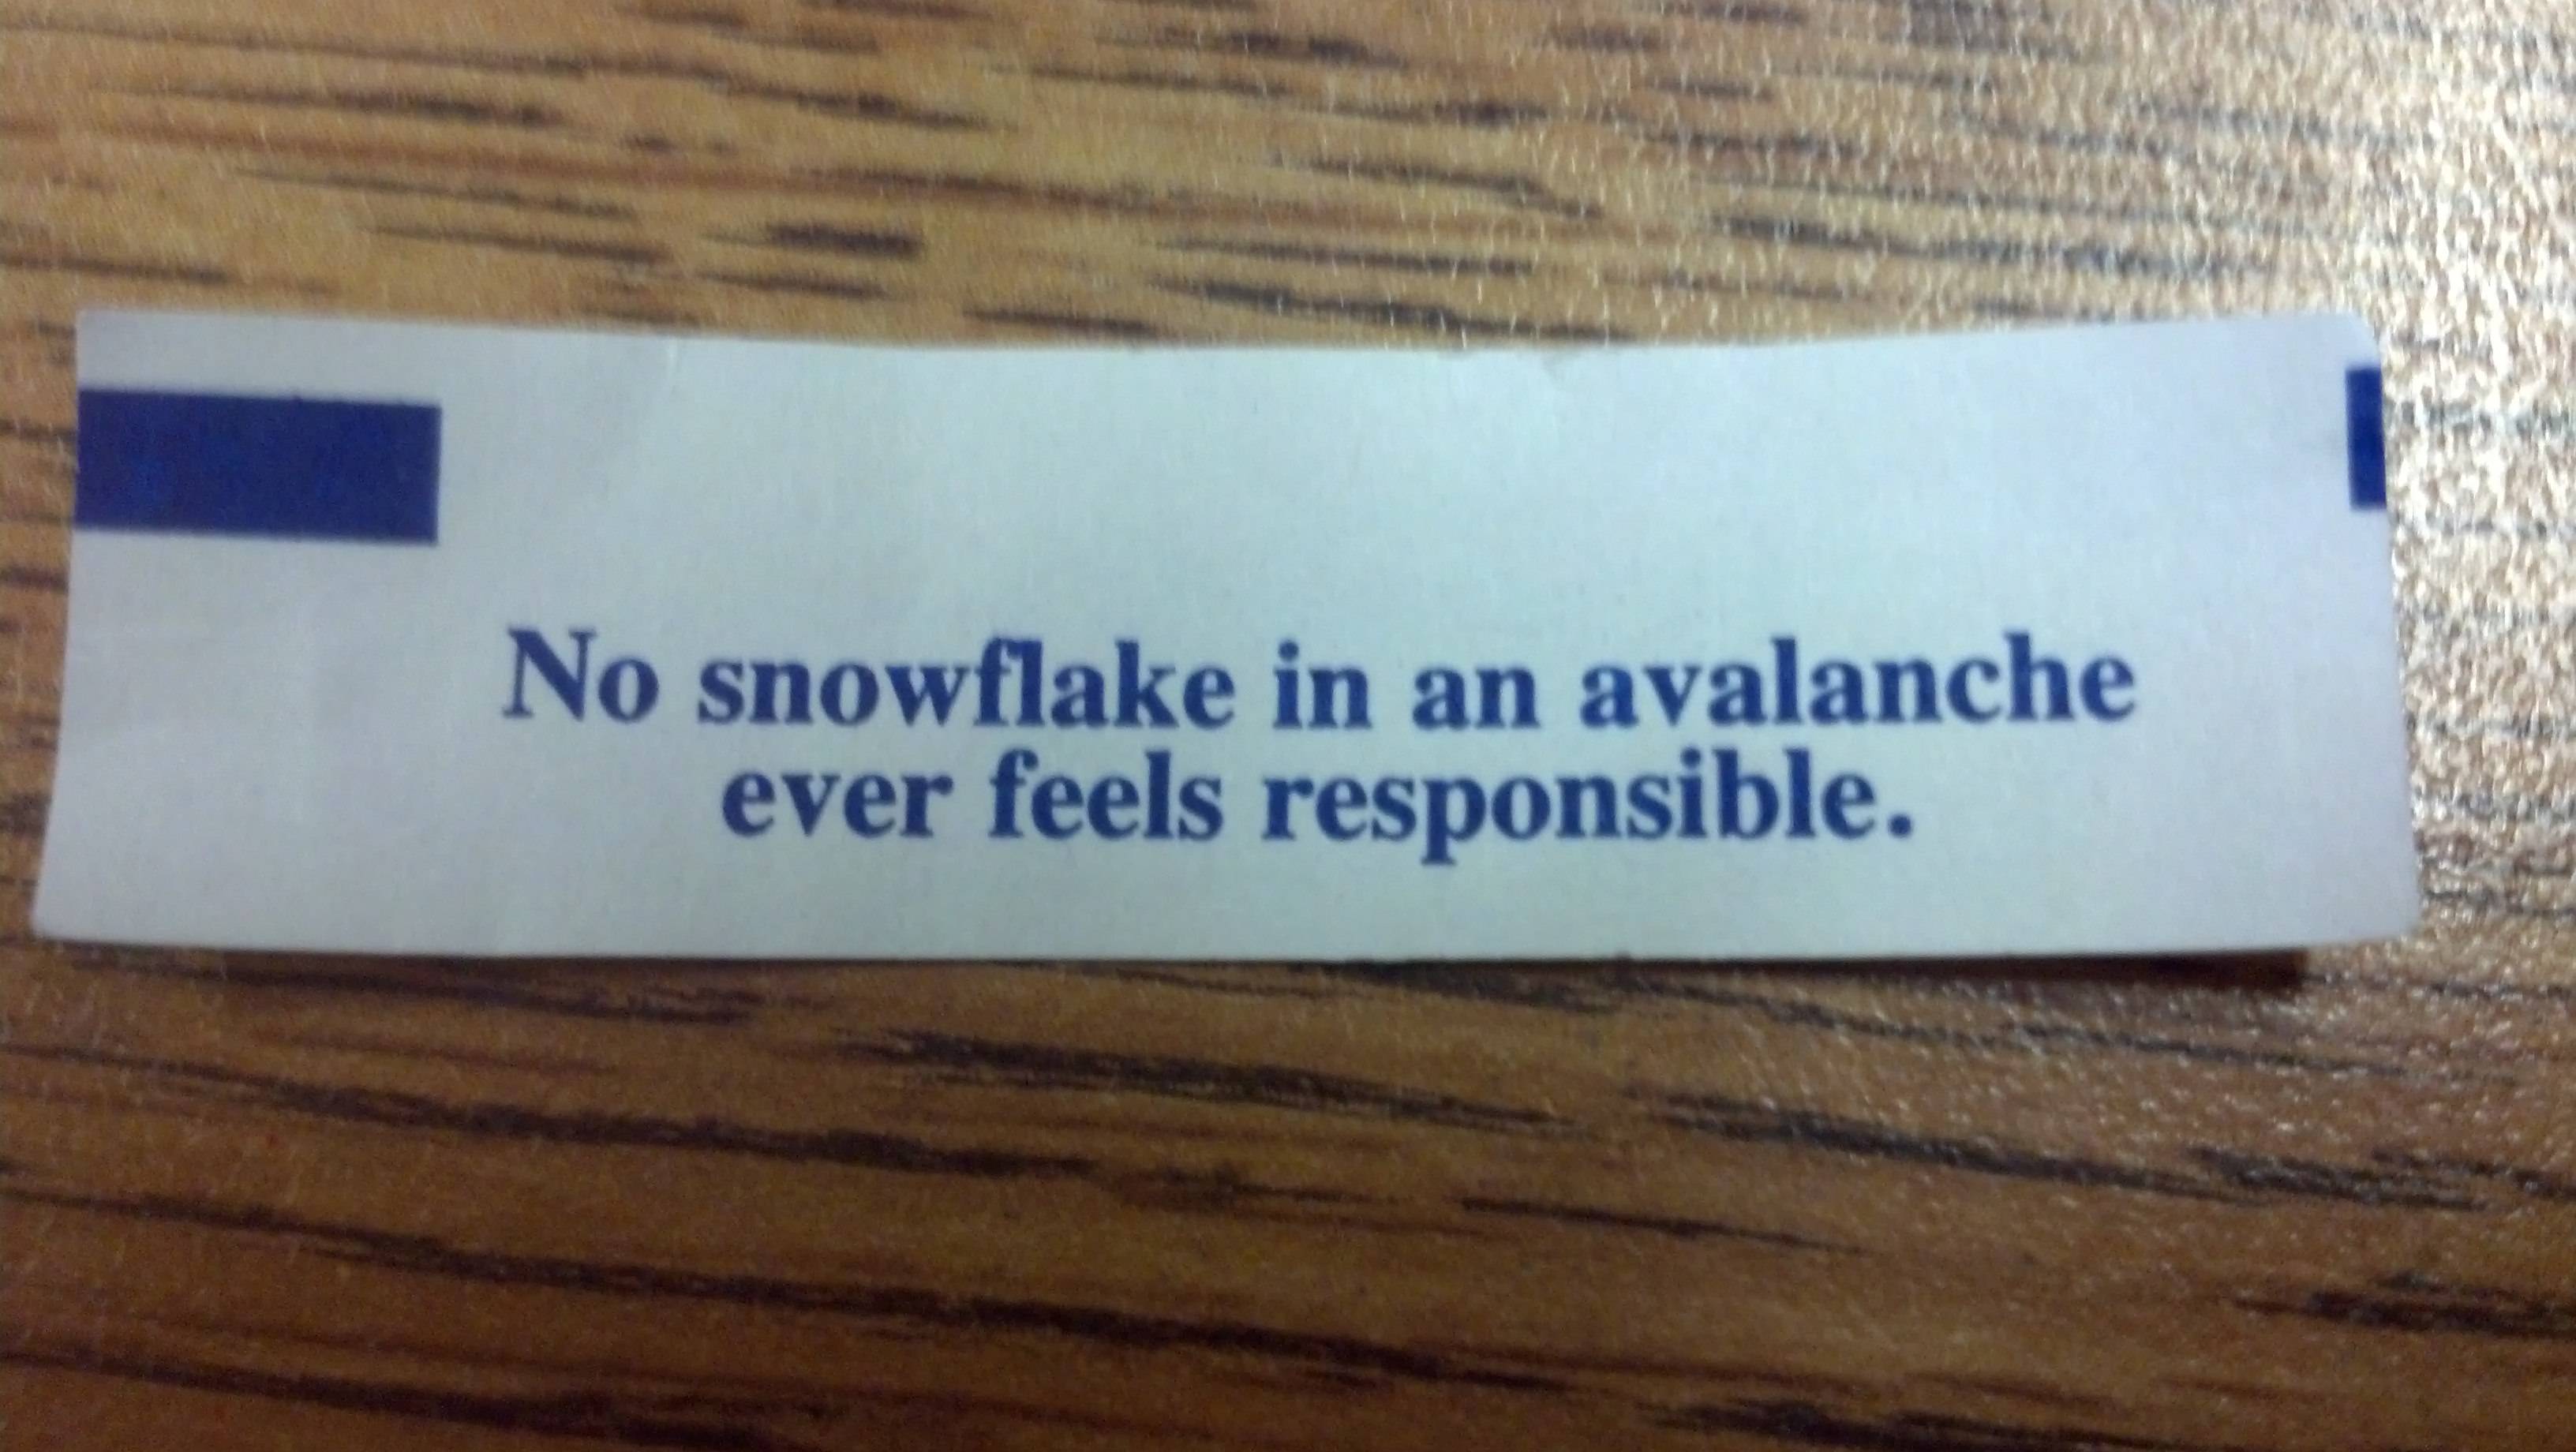 Mind. Blown. By fortune cookie.